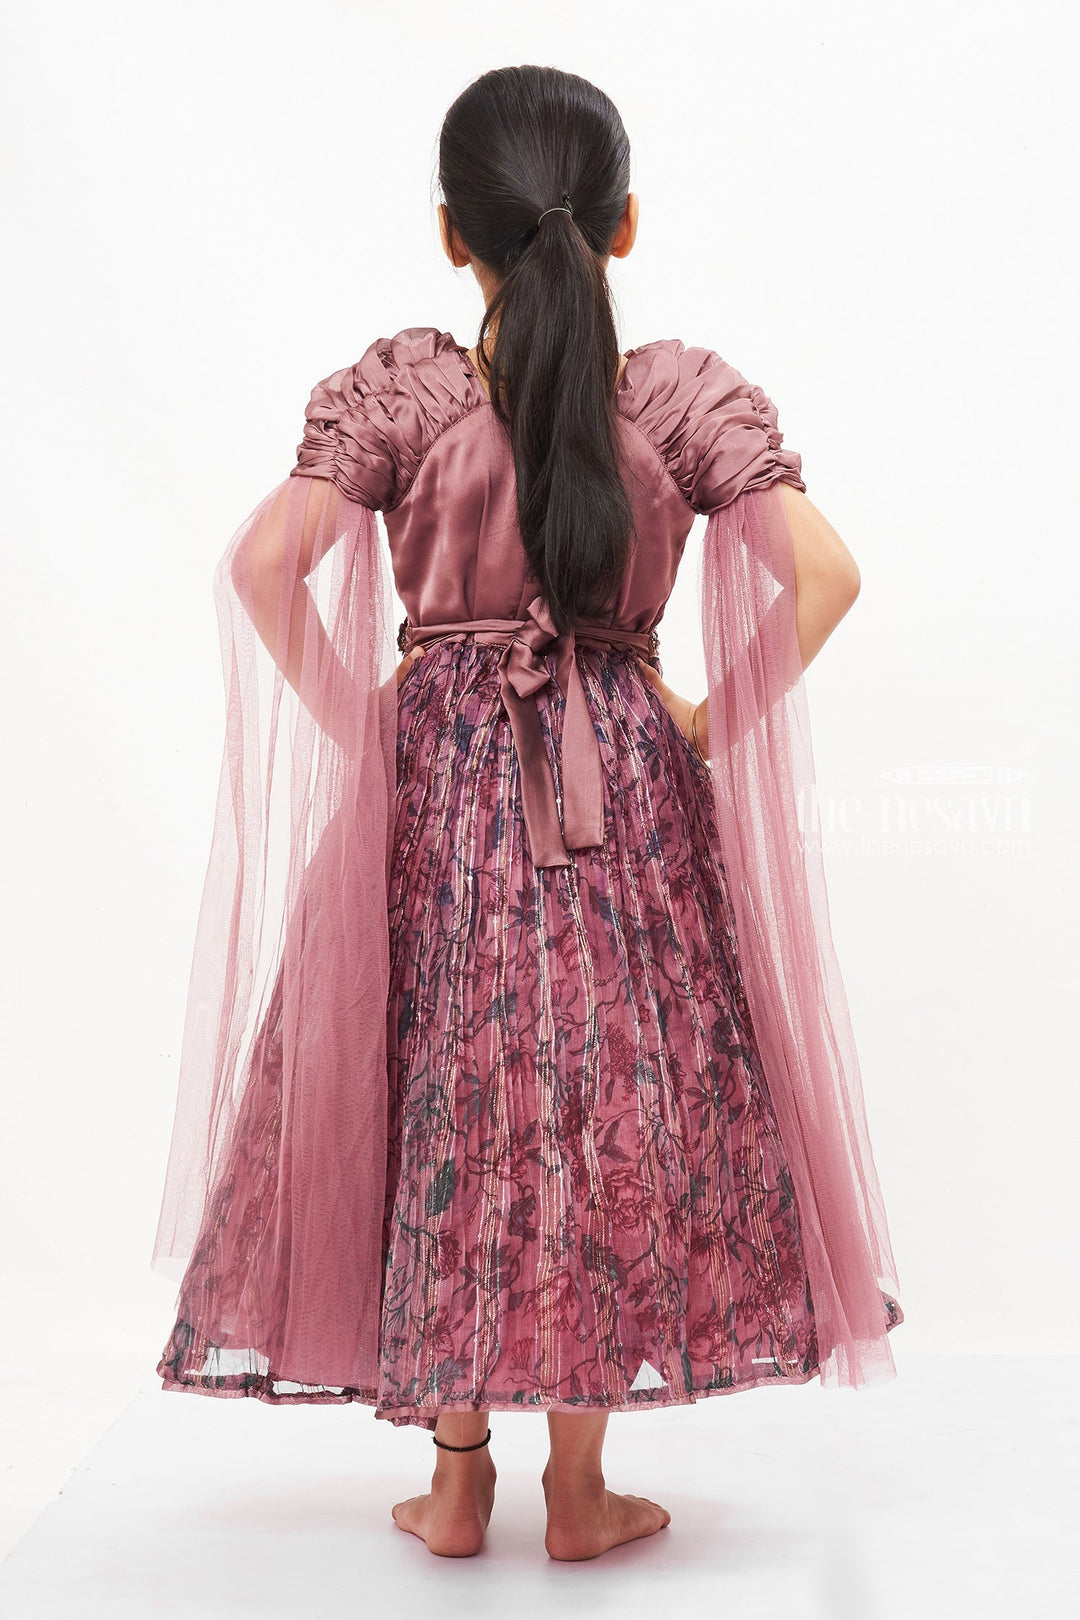 The Nesavu Girls Party Gown Enchanting Pink Princess Anarkali Gown for Girls - Fairy Tale Elegance Nesavu Girls Pink Anarkali Gown | Luxurious Floral Party Dress for Kids | The Nesavu